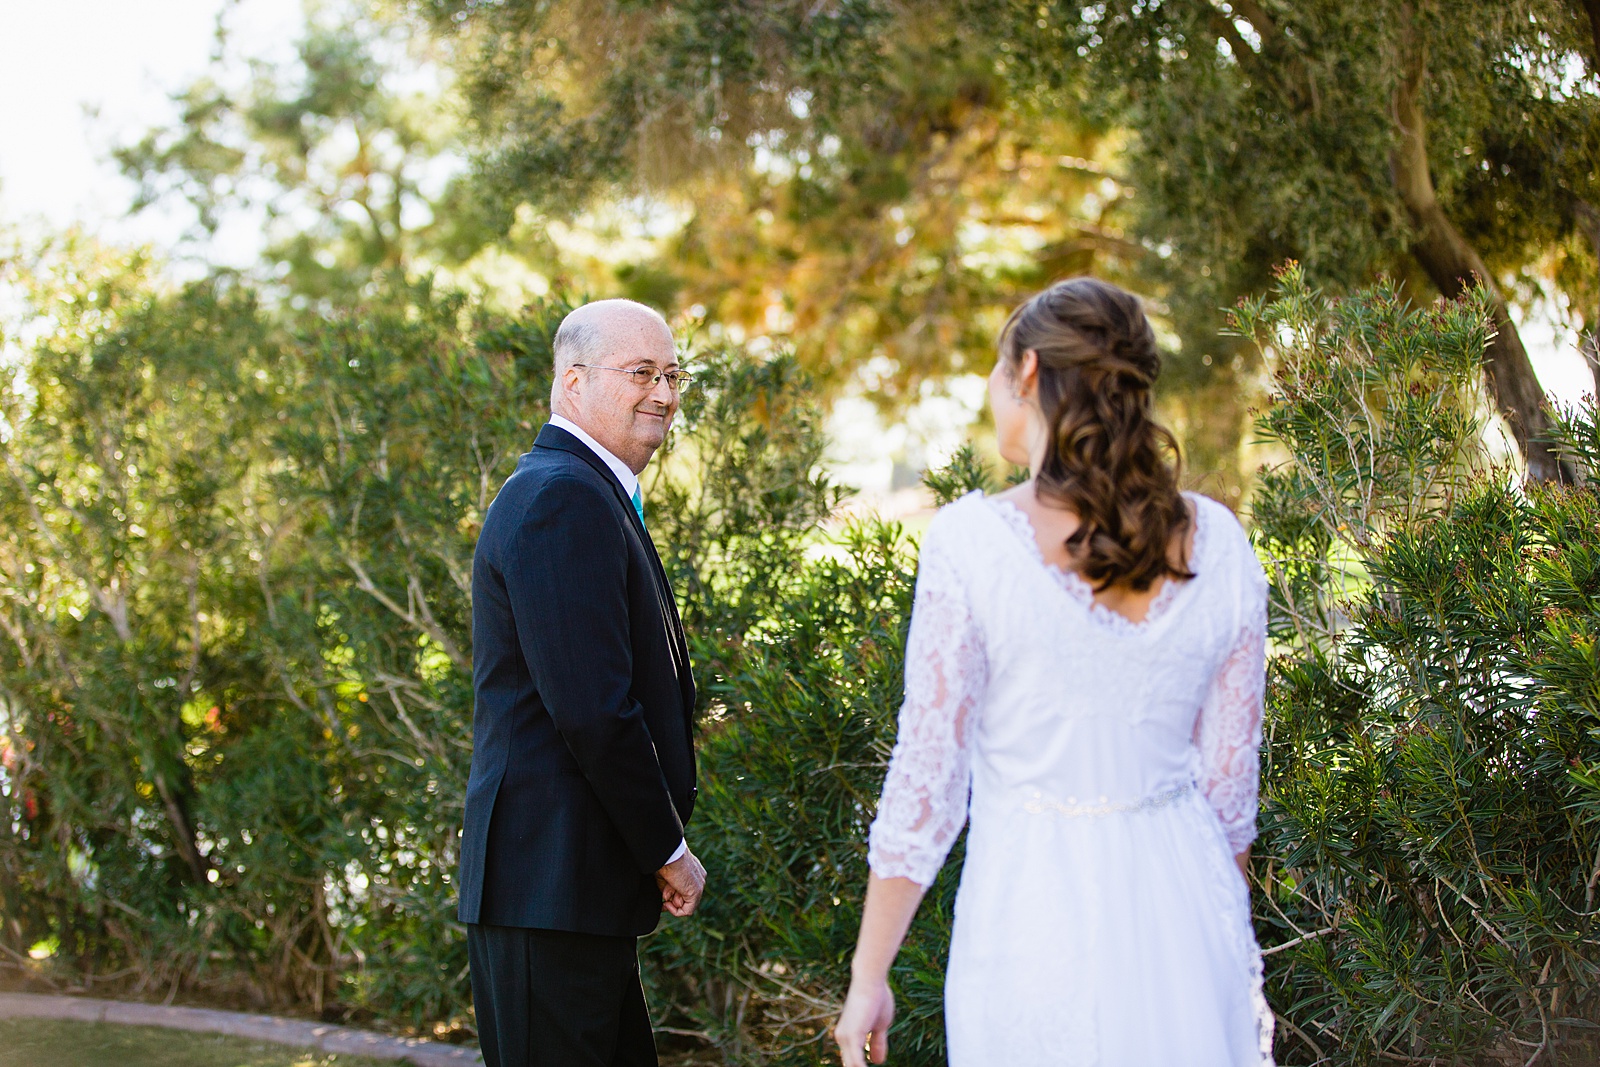 Bride's first look with her father at Ocotillo Oasis by Phoenix wedding photographer PMA Photography.